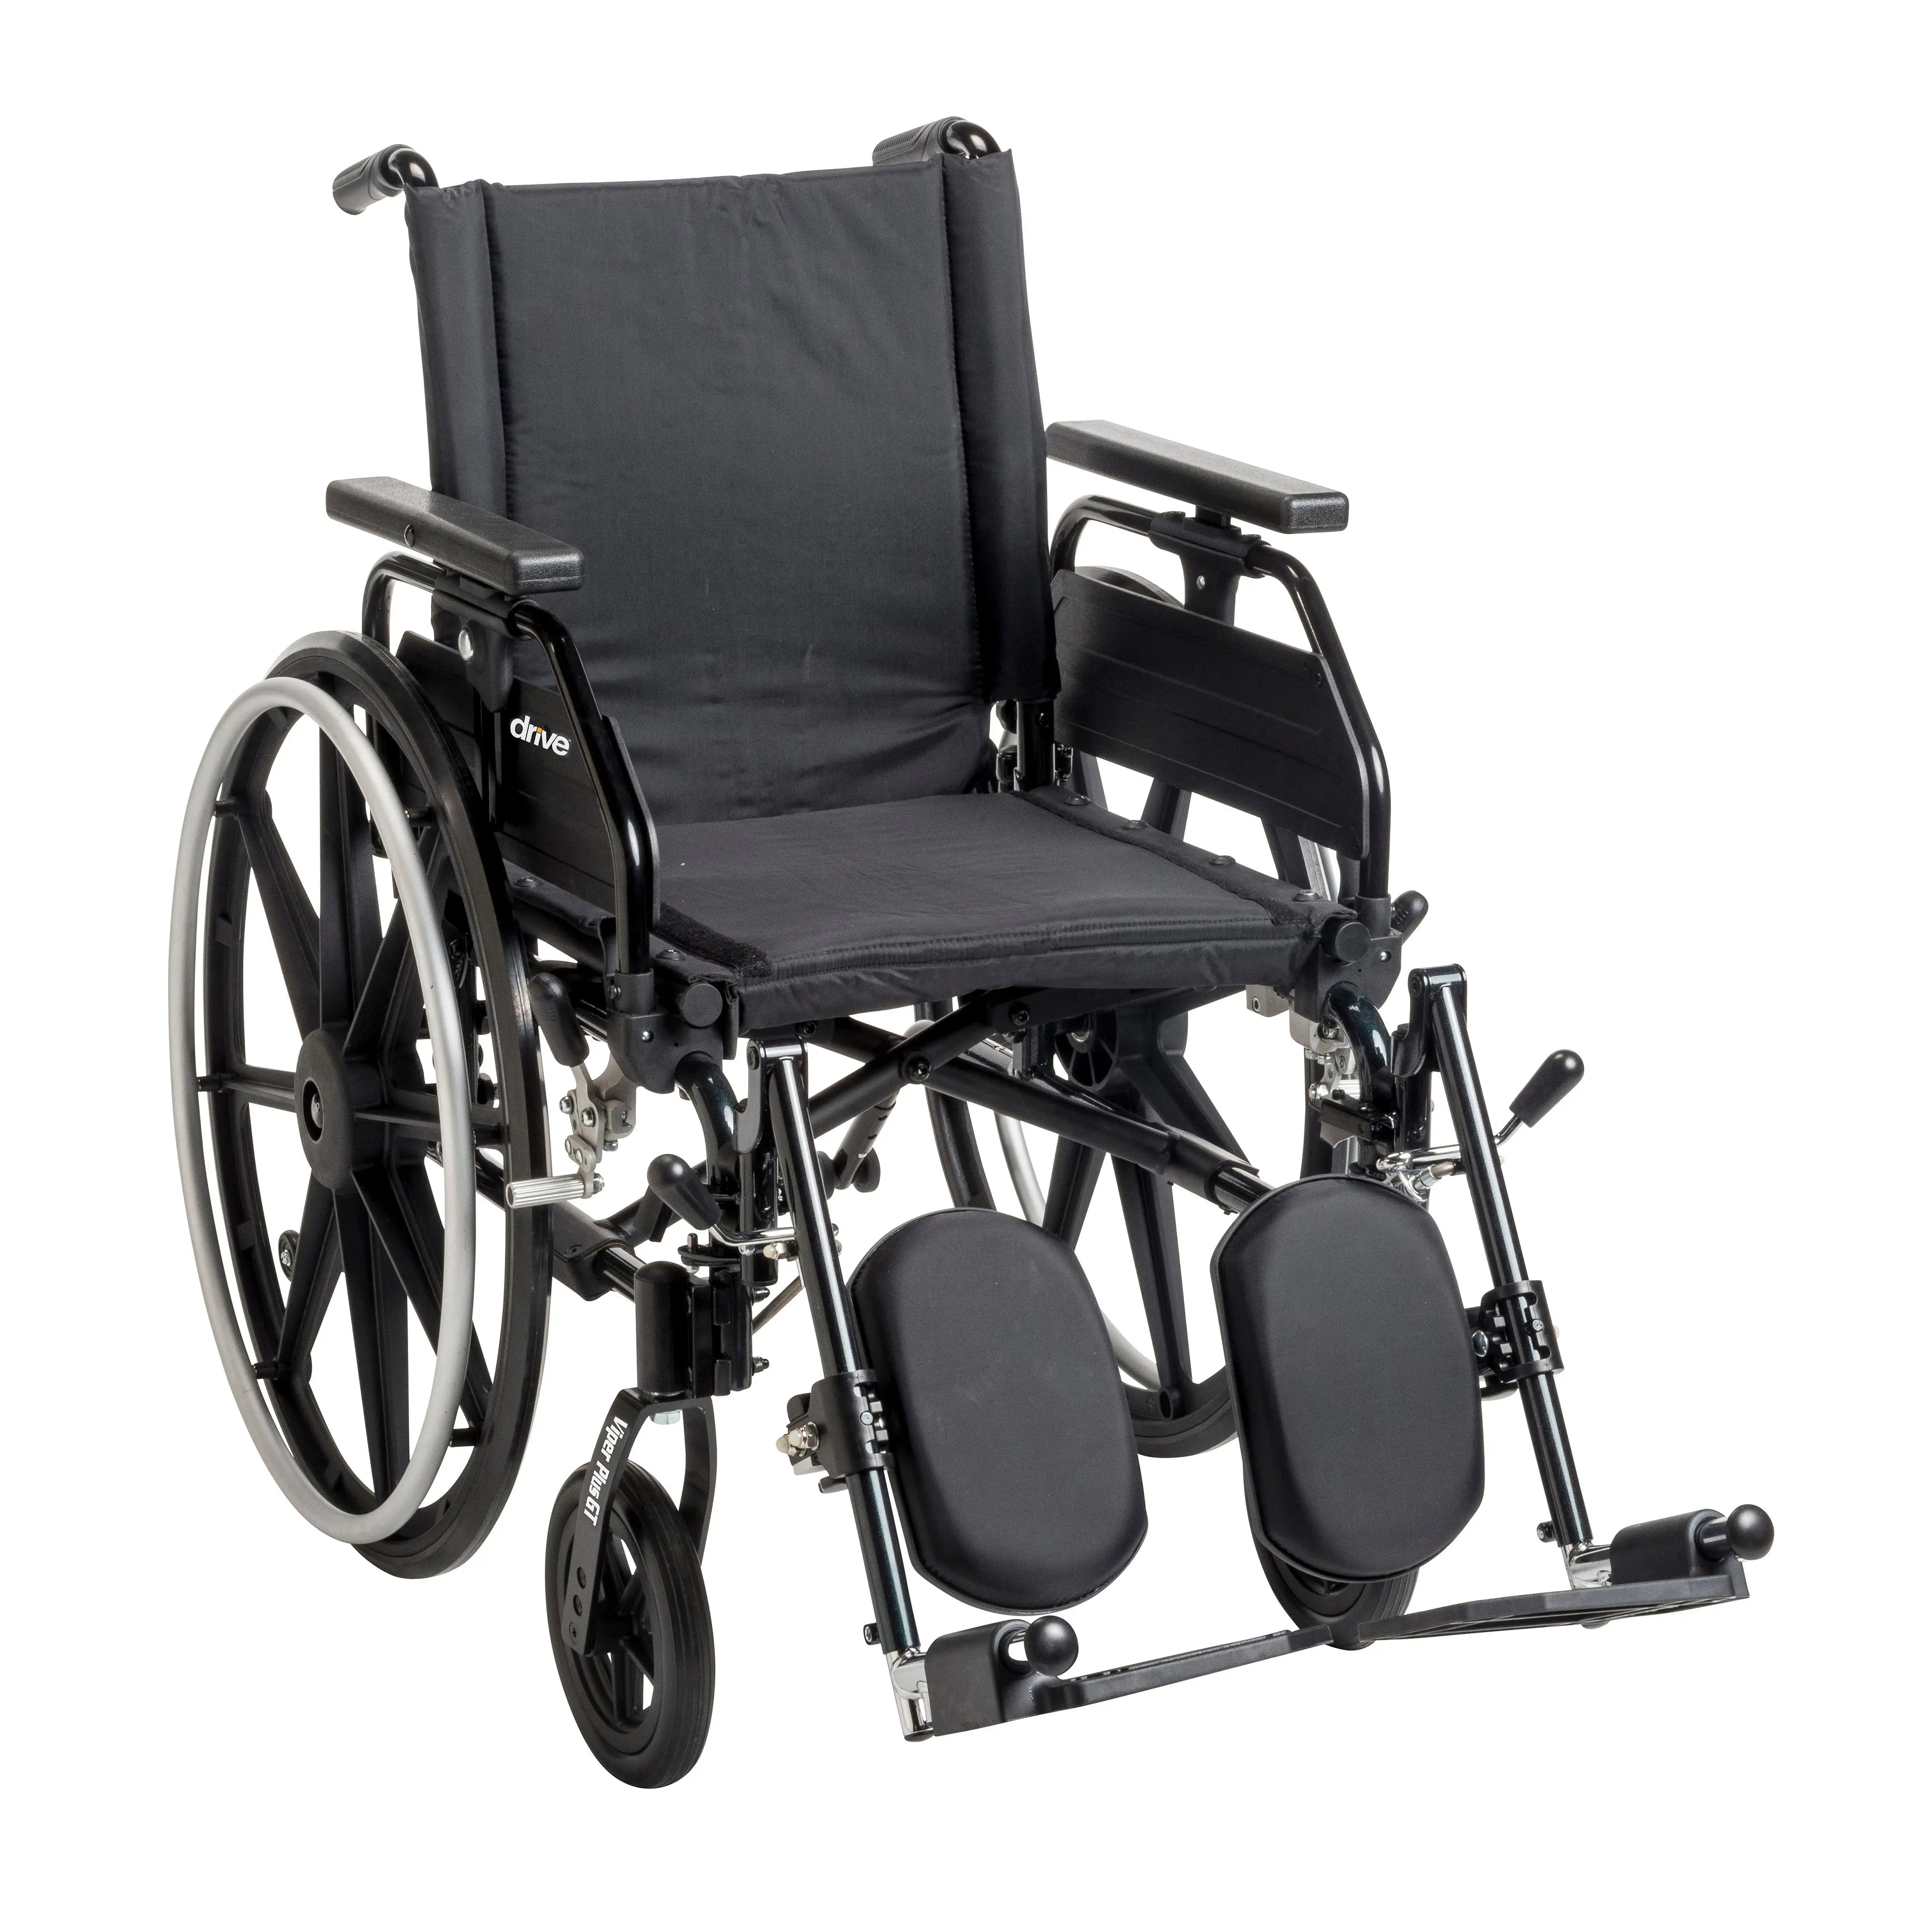 Viper Plus GT Wheelchair with Universal Armrests - Home Health Store Inc